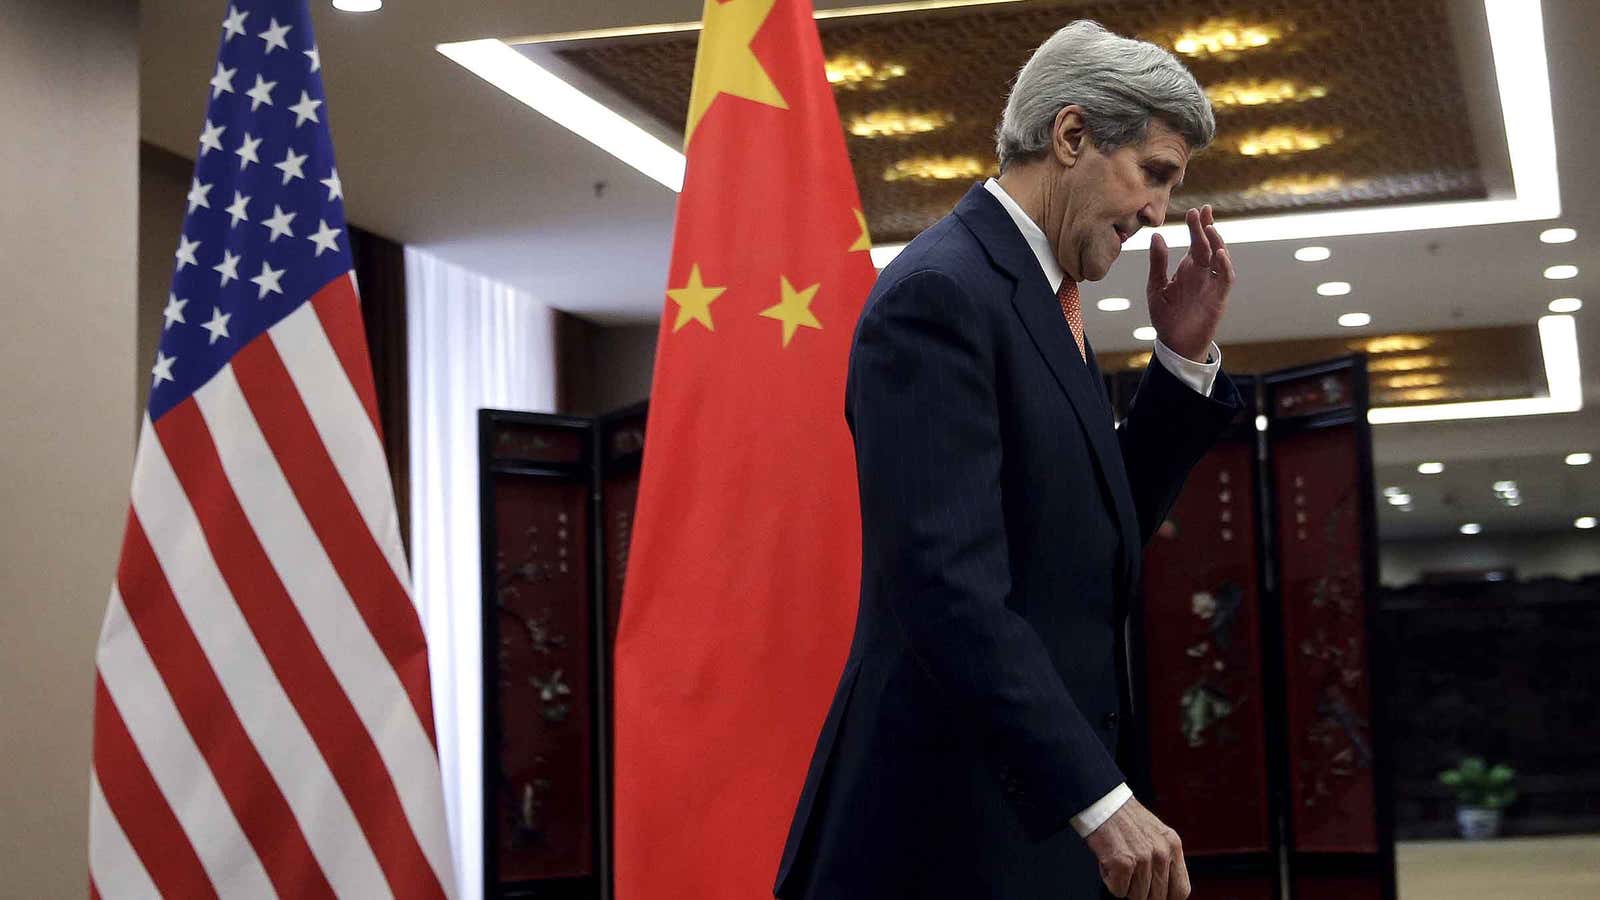 One day earlier (Jan. 28), Kerry was in Beijing discussing North Korea.